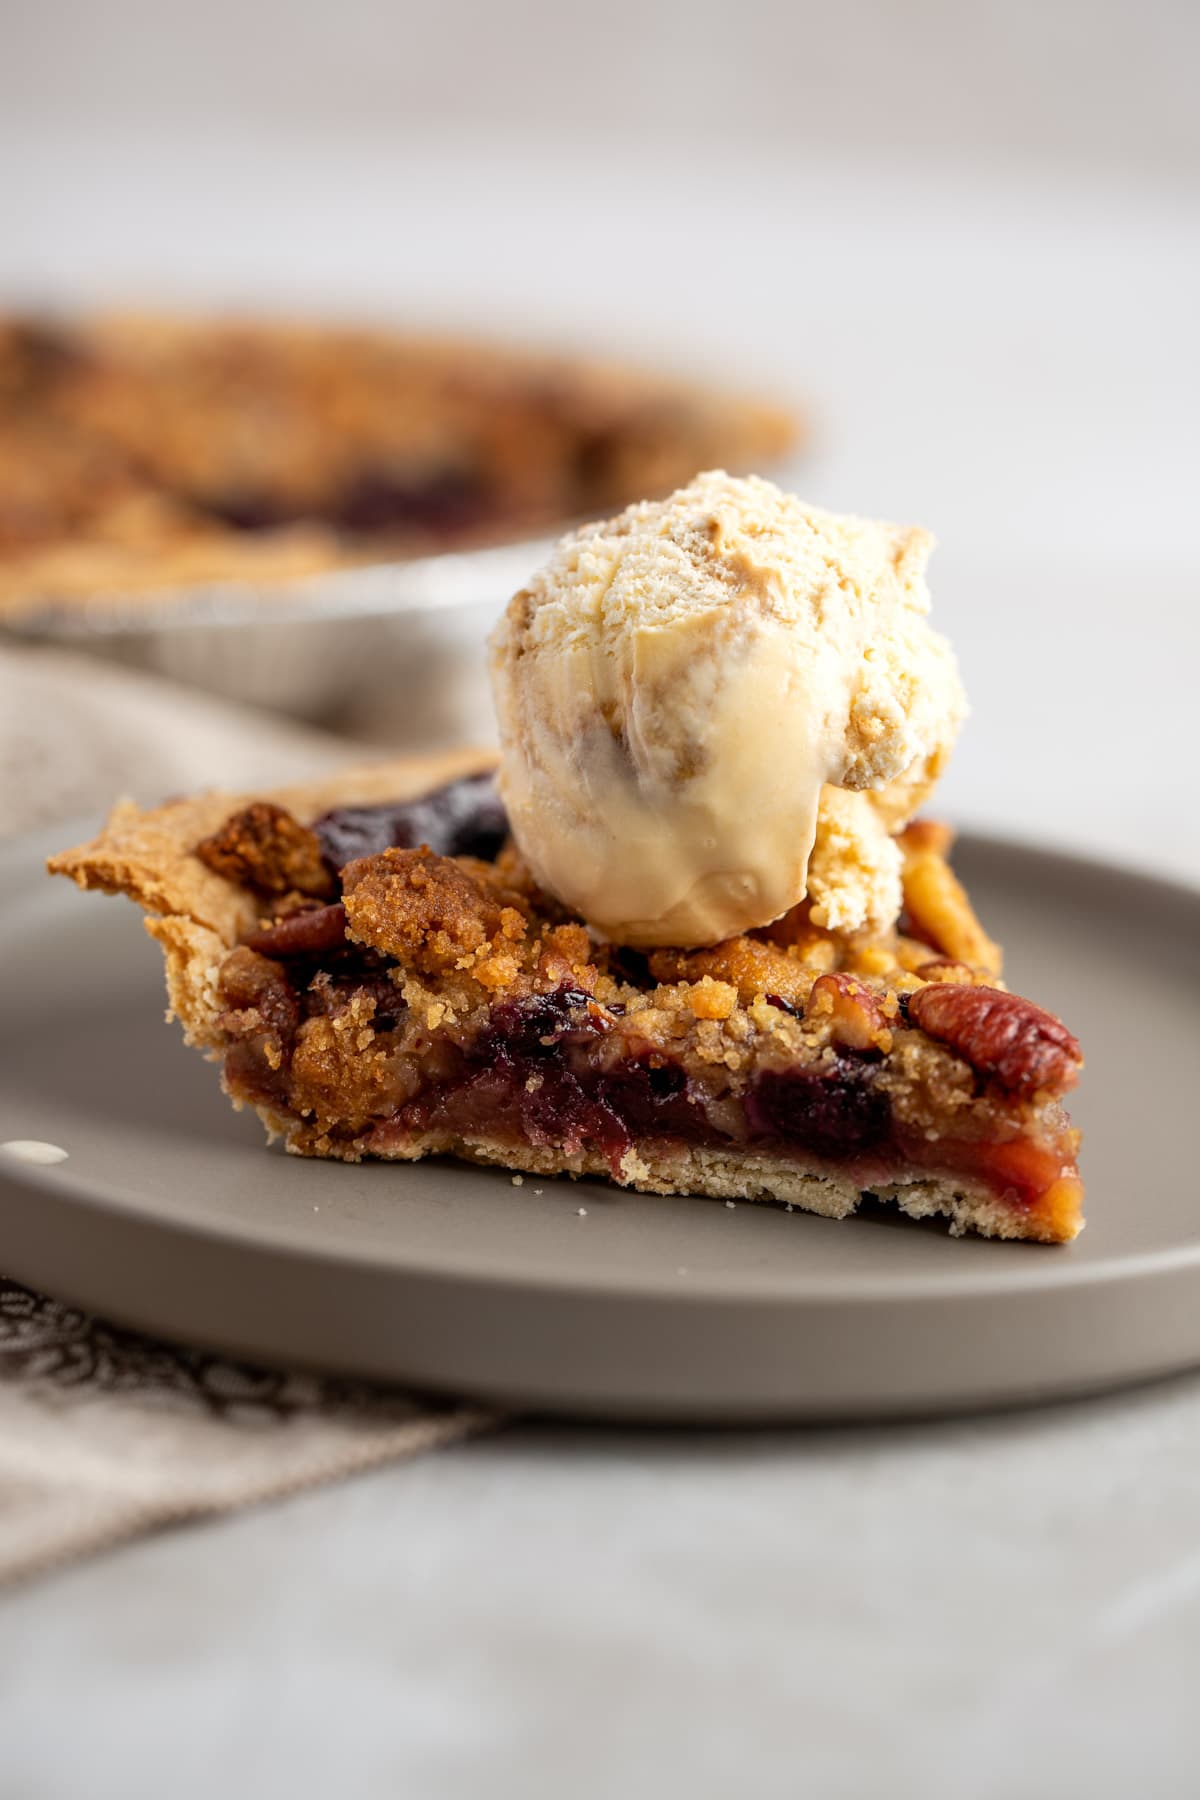 A slice of apple blueberry pie on a round brown plate, topped with a scoop of ice cream.